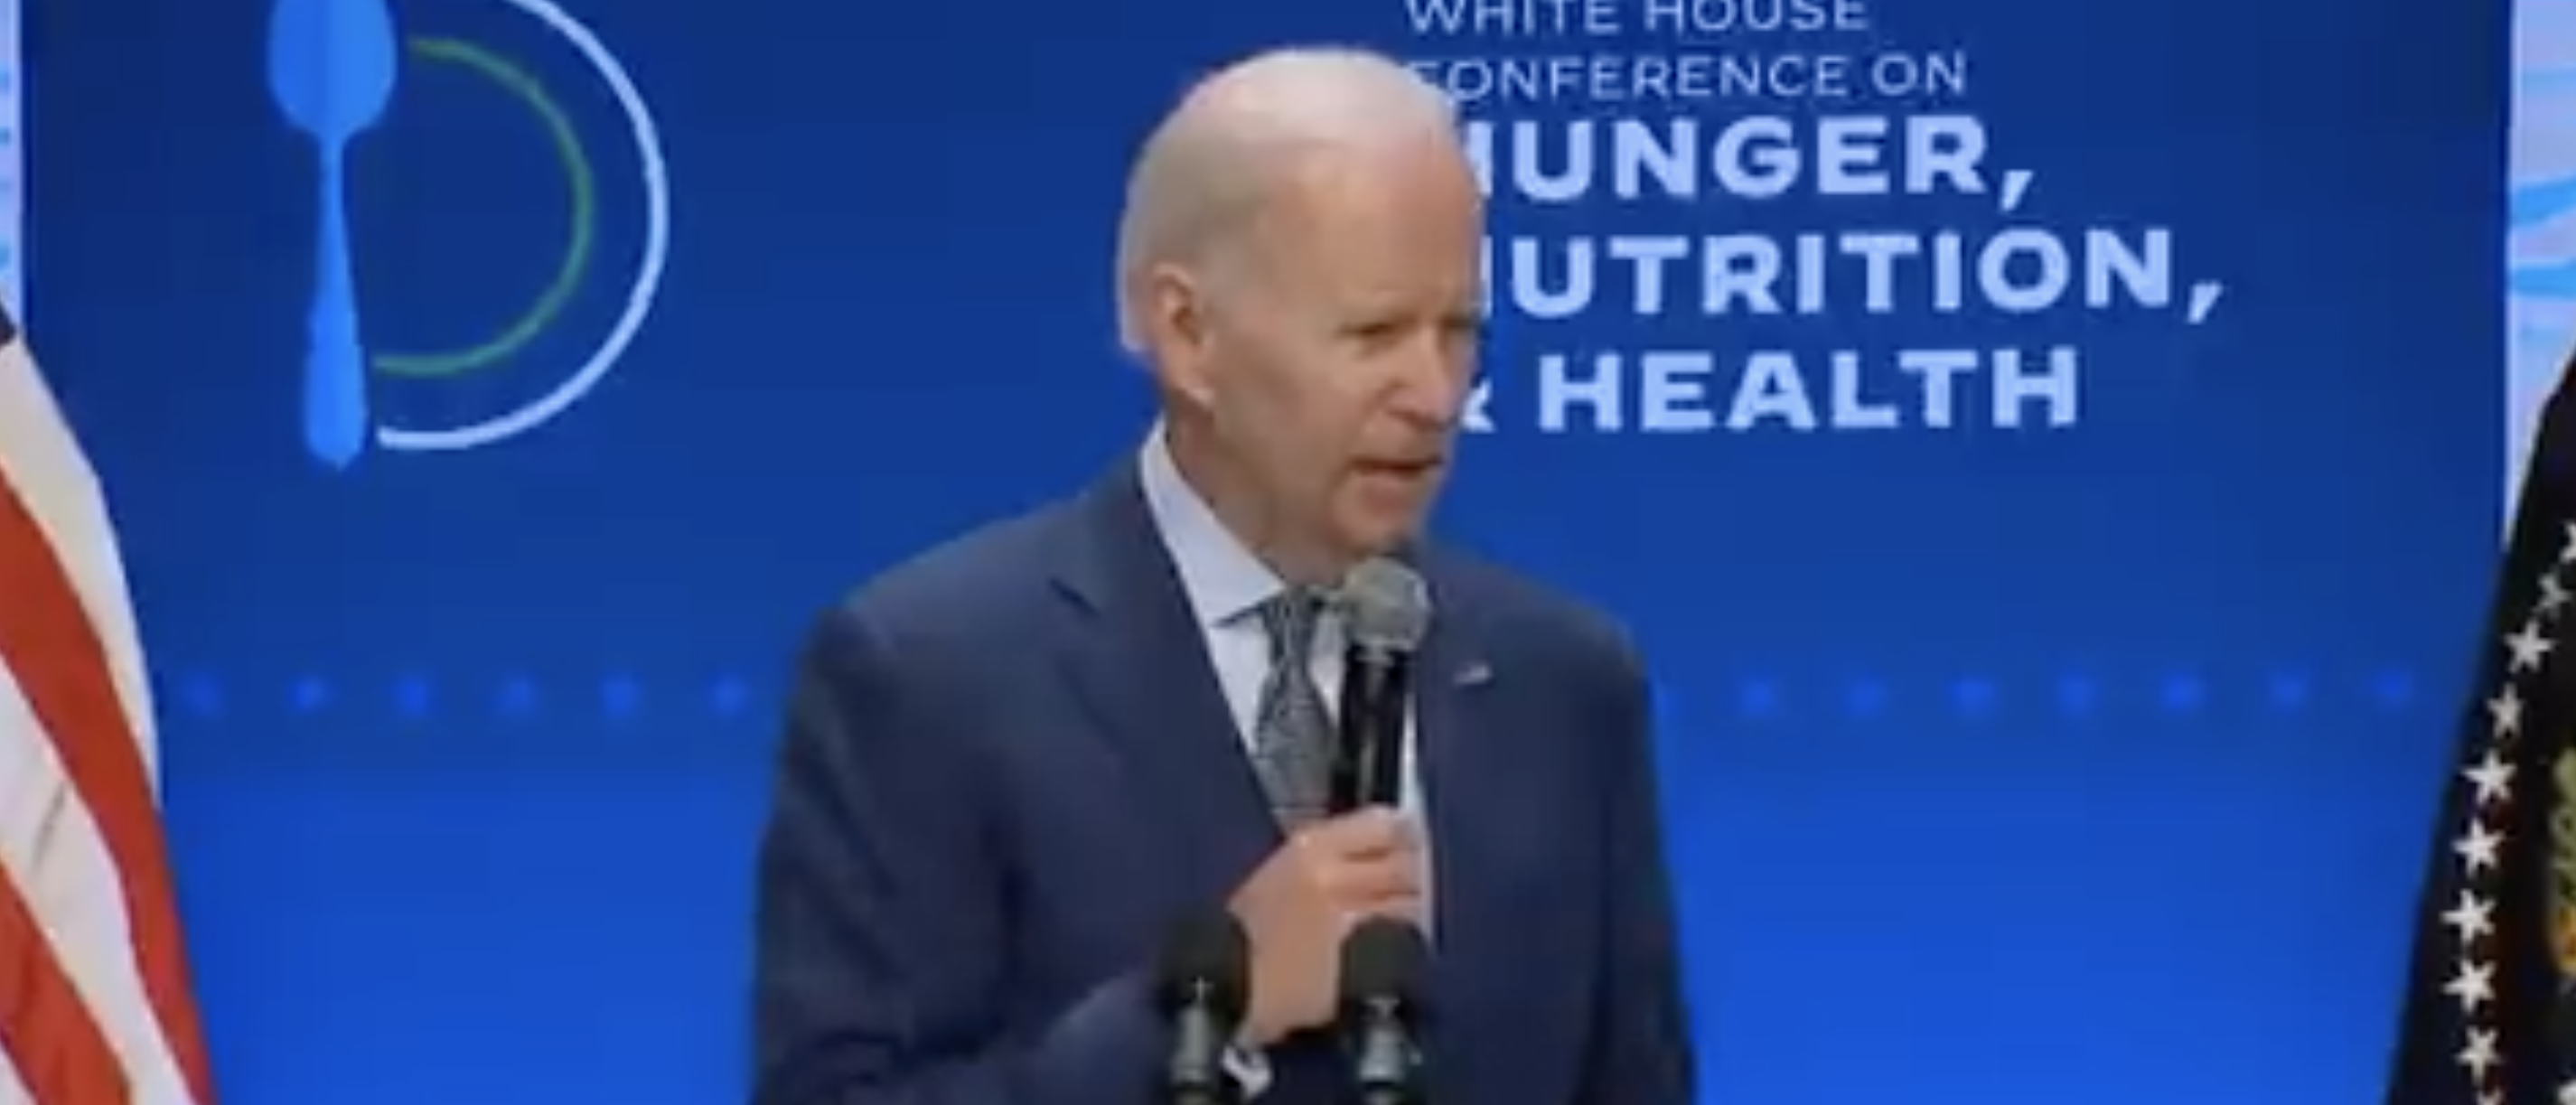 ‘Where’s Jackie?’: Biden Appears To Call For Congresswoman Who Died In August